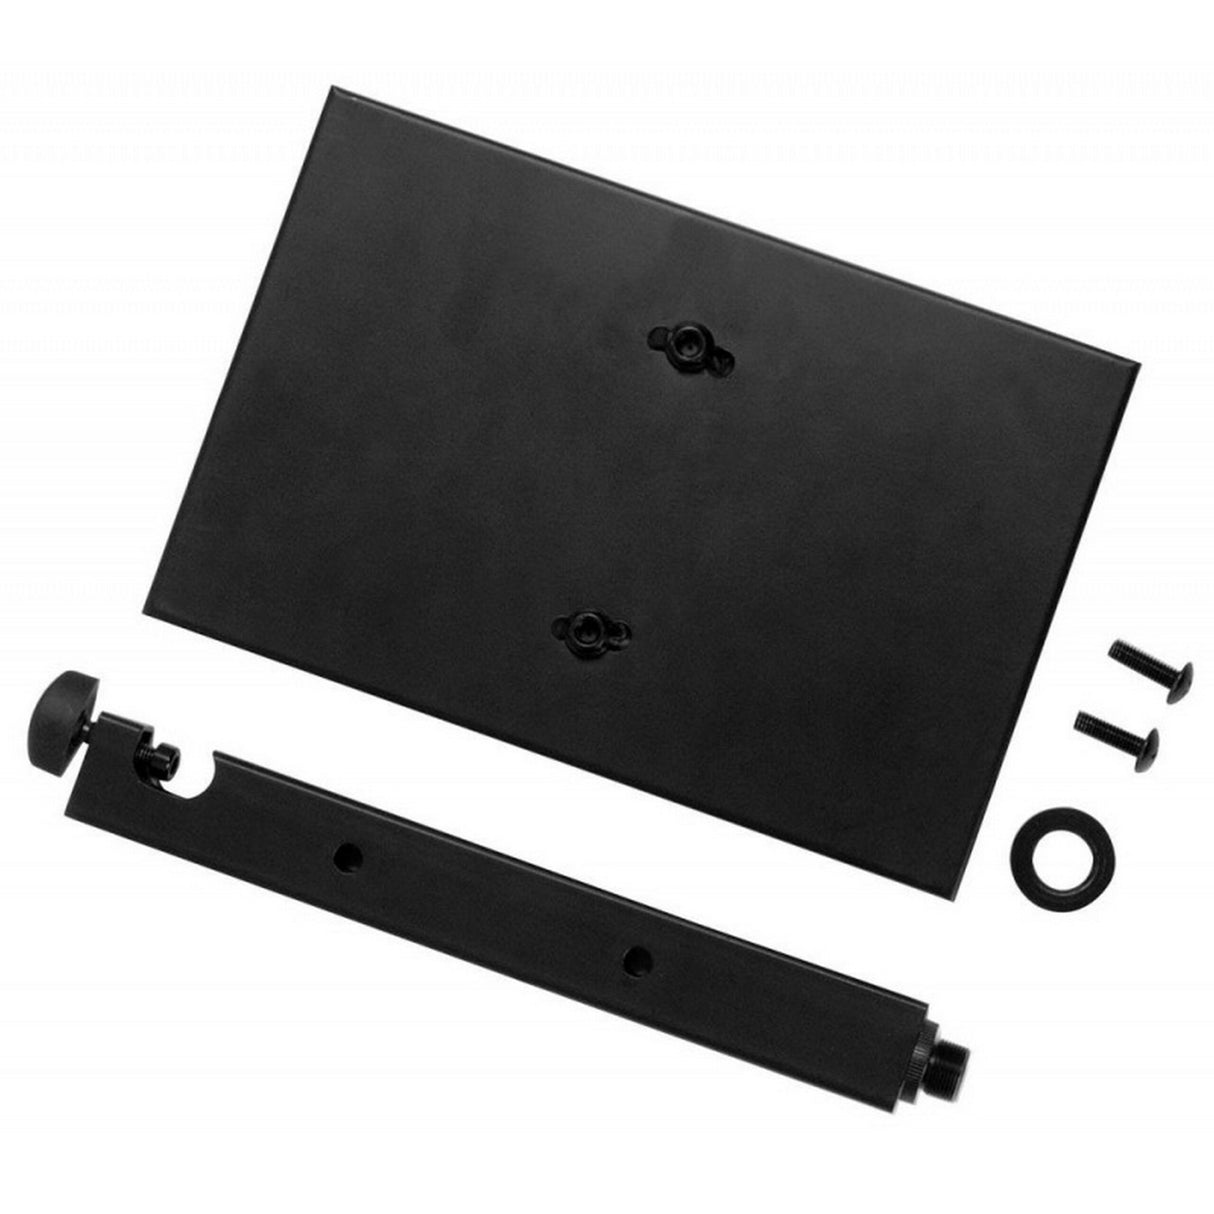 On-Stage MST1000 U-Mount Microphone Stand Tray